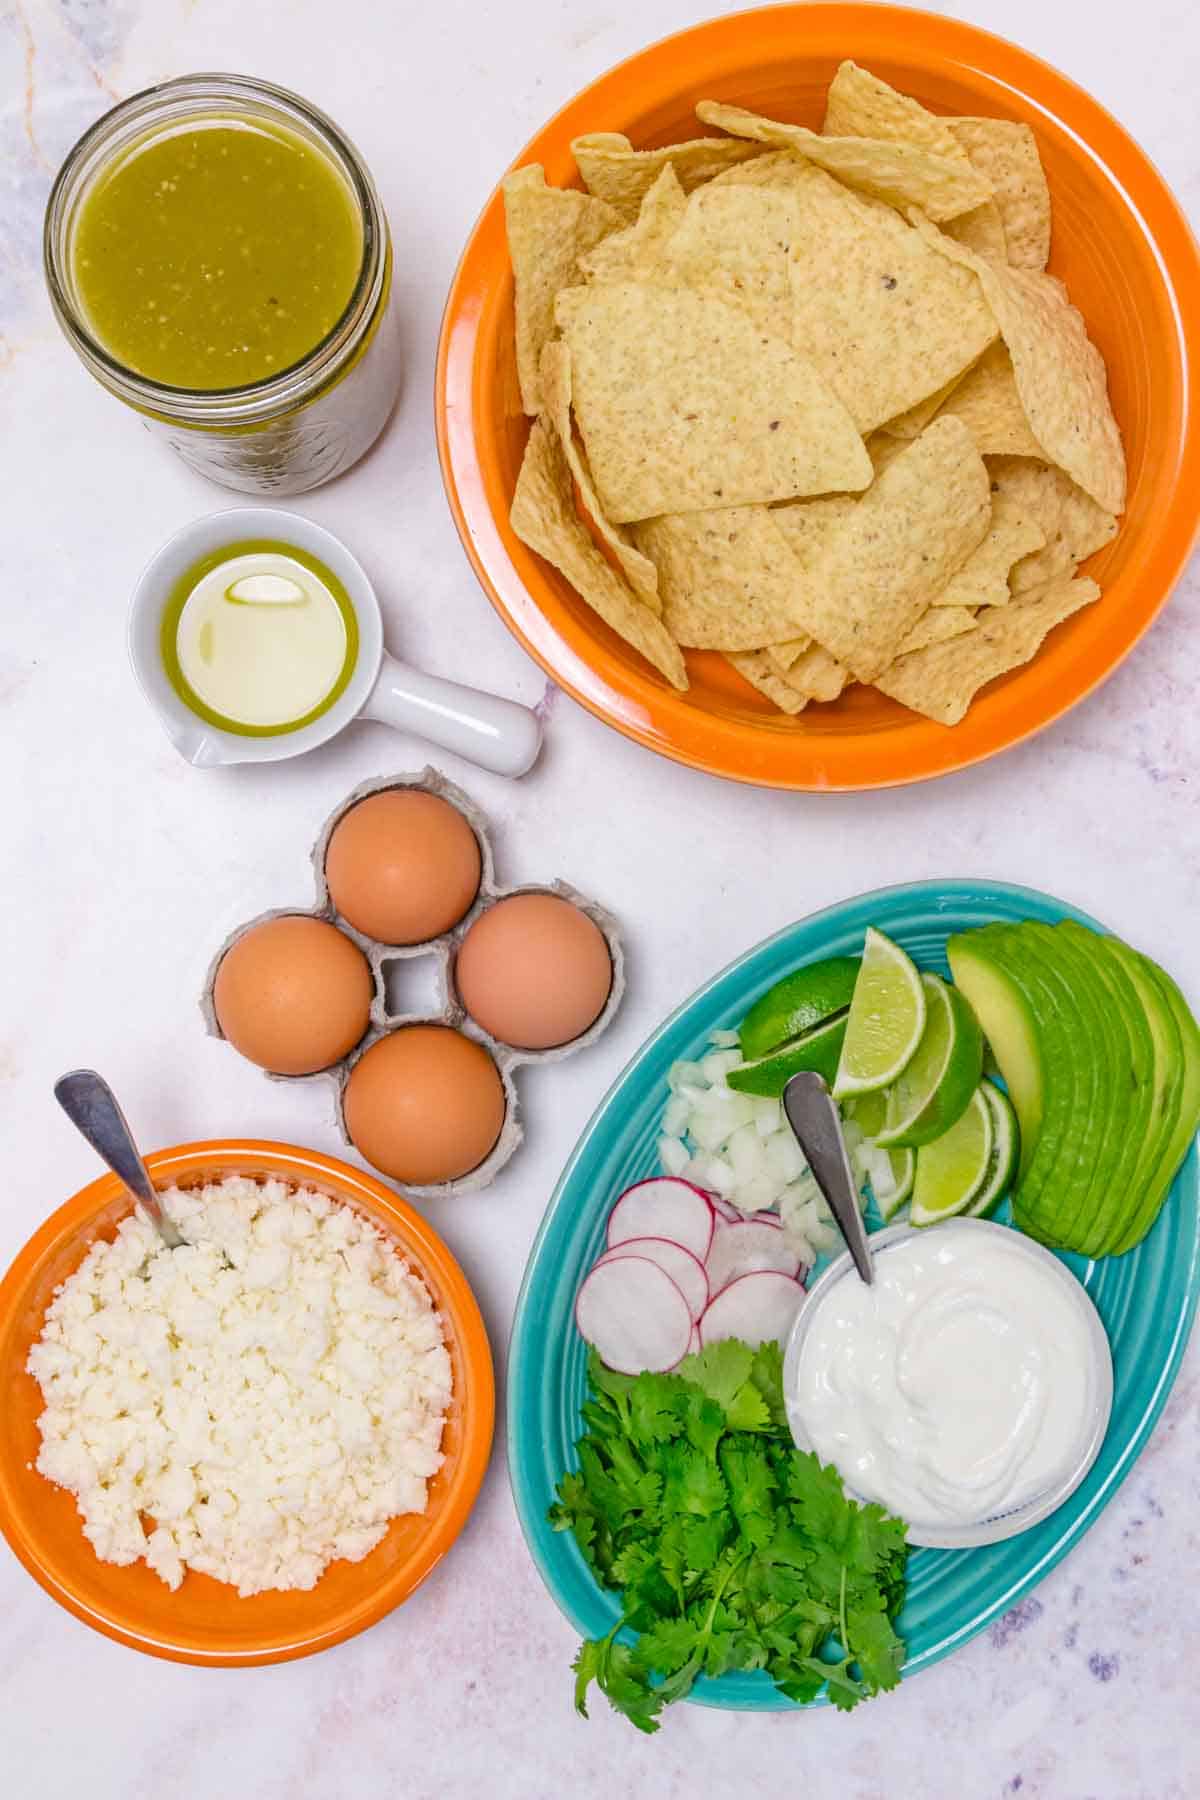 The ingredients for chilaquiles verdes.